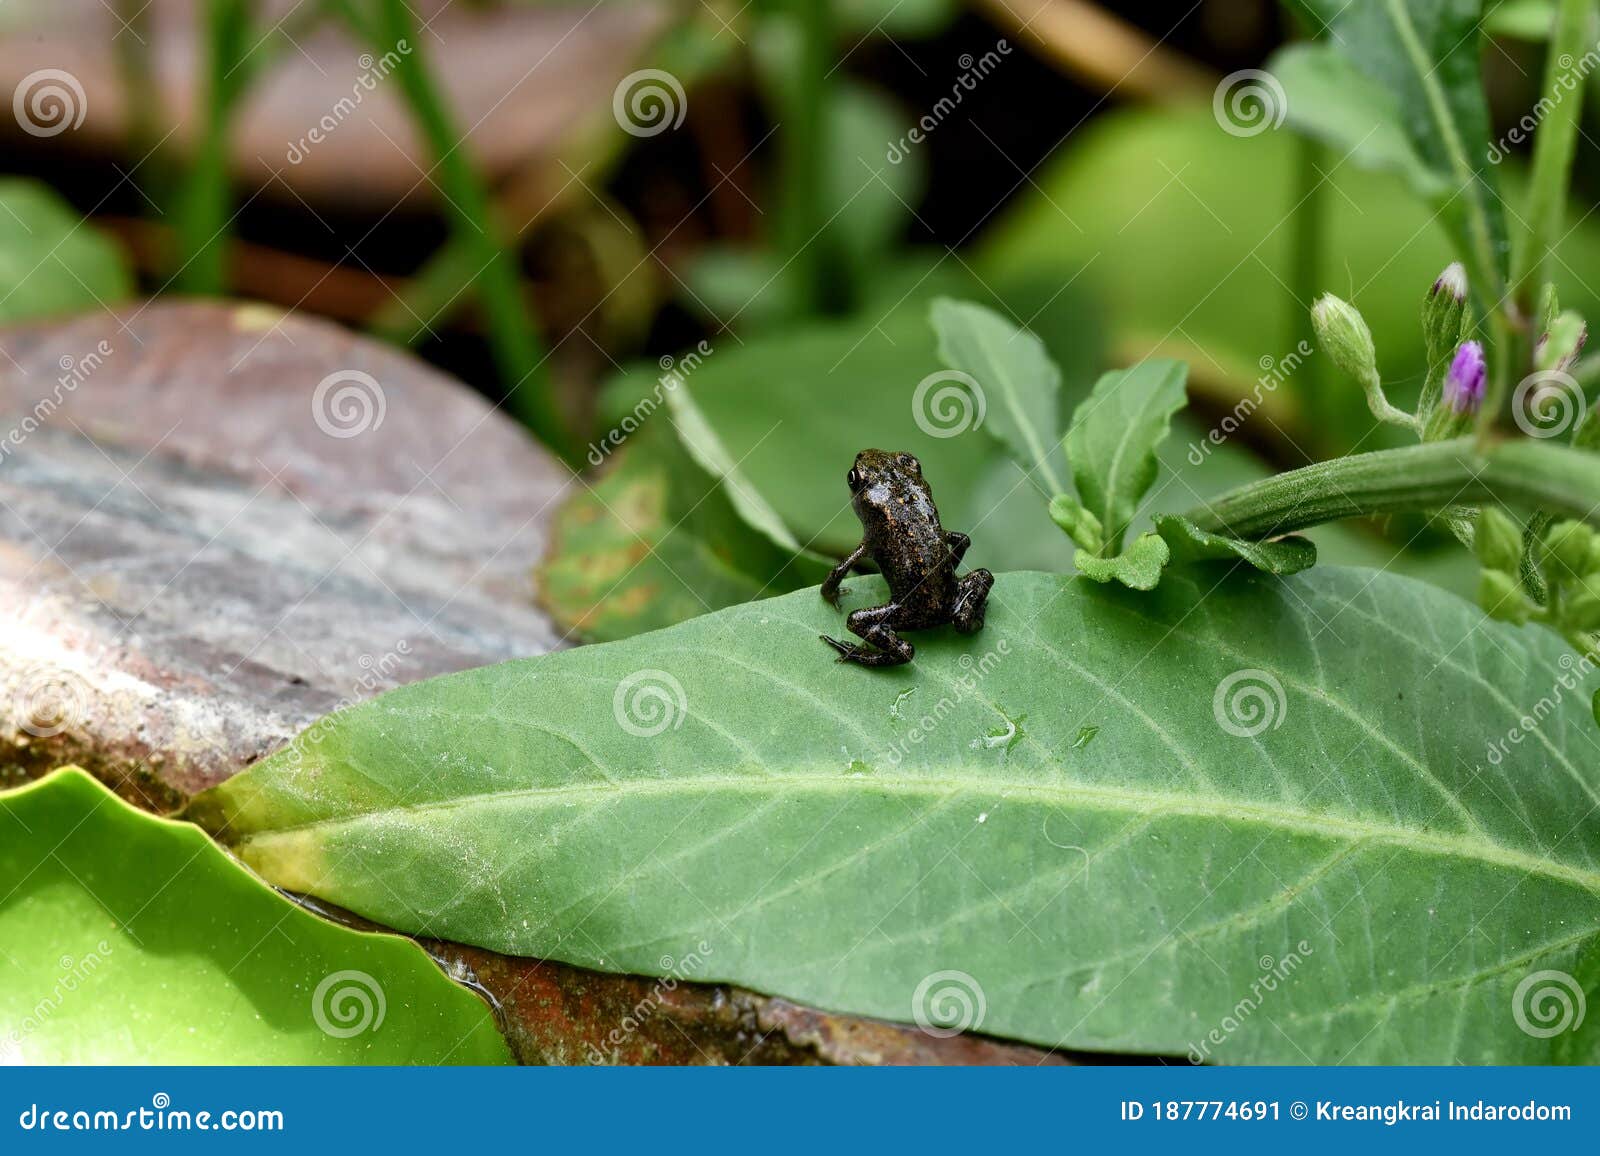 https://thumbs.dreamstime.com/z/baby-toad-young-common-small-frog-sitting-green-leaf-frogs-eat-insects-control-natural-environment-balance-187774691.jpg